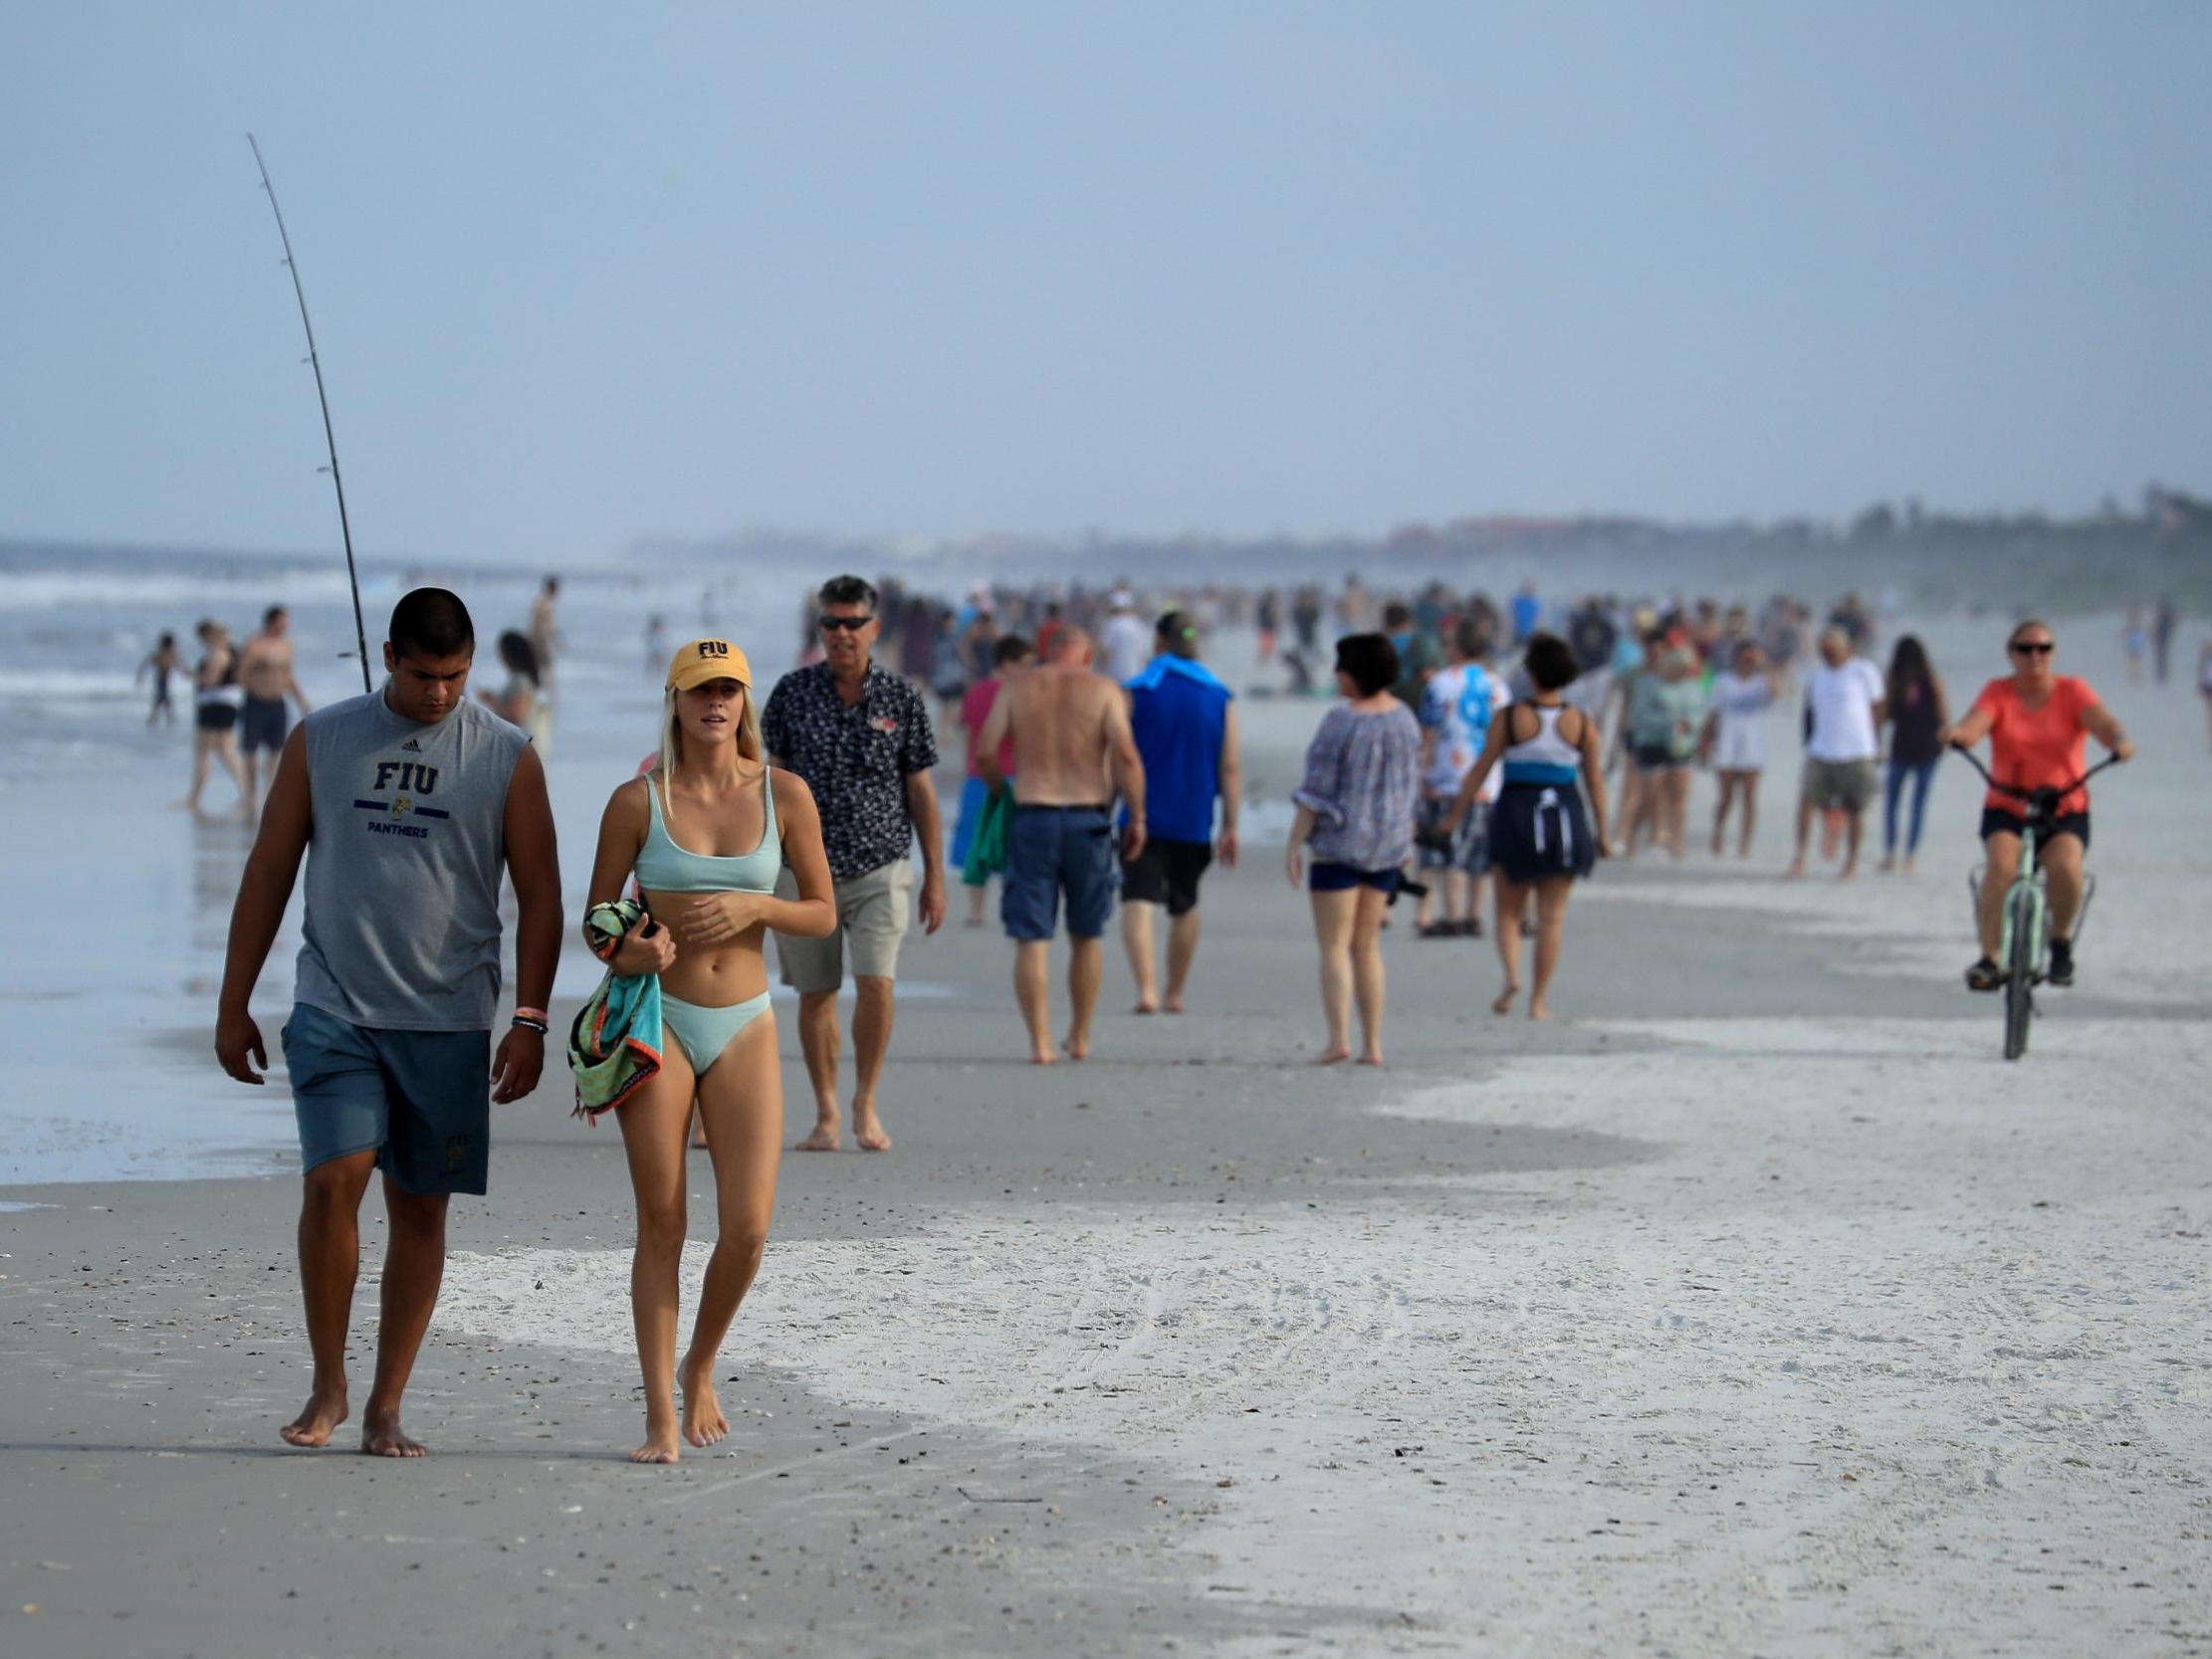 Police arrest homicide suspect while enforcing social distancing on Florida beach thumbnail